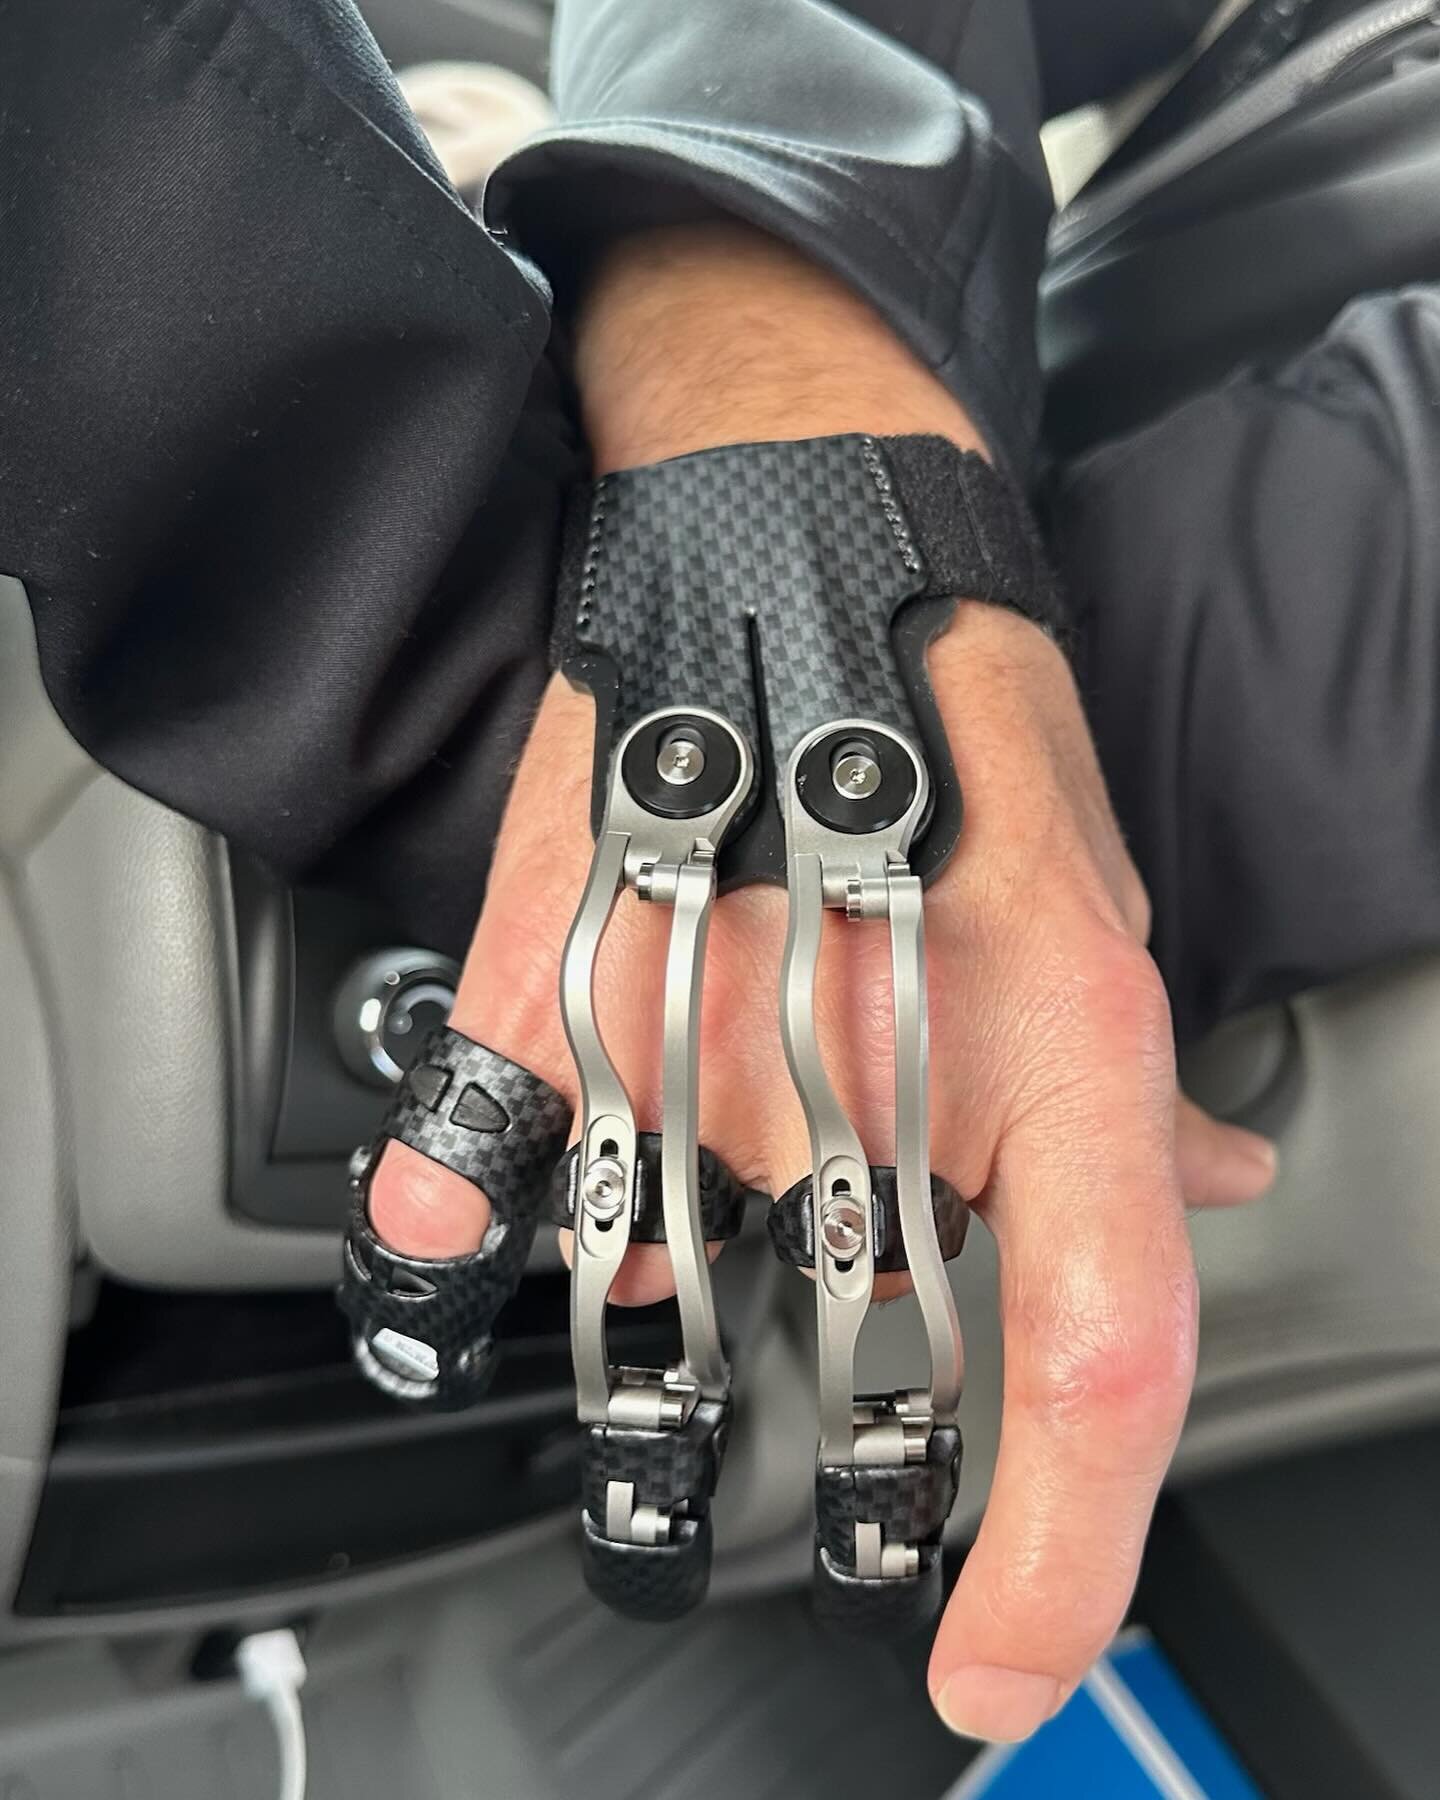 SRT has you covered if you&rsquo;ve experienced any type of amputation.  Often the loss of finger(s) get left untreated but with a prosthetic device, grip strength and finger dexterity can be regained!  Consultations are always free at SRT so don&rsq